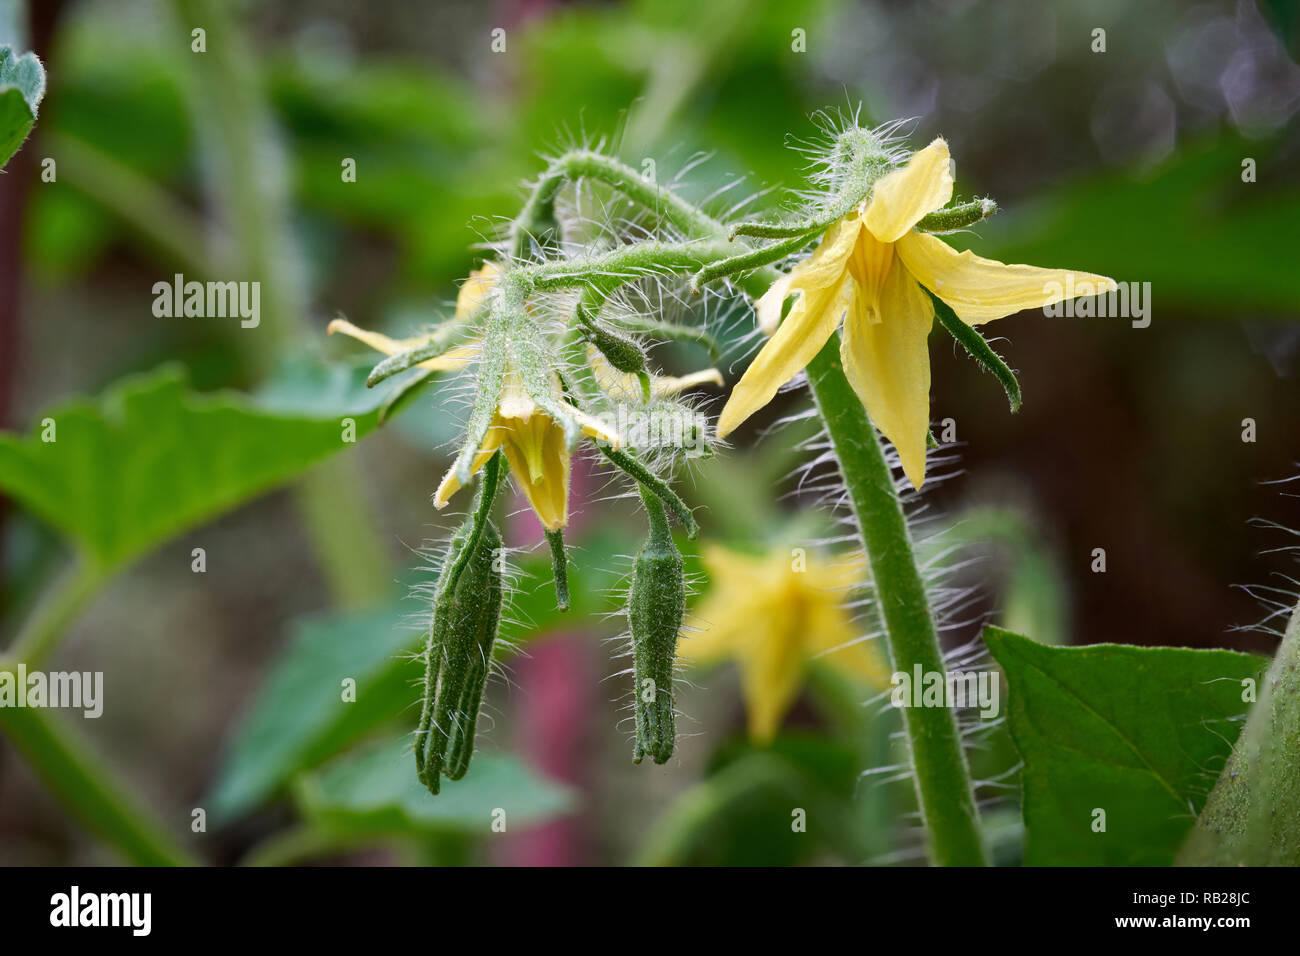 Close-up of flowers on a Tomato plant. Stock Photo